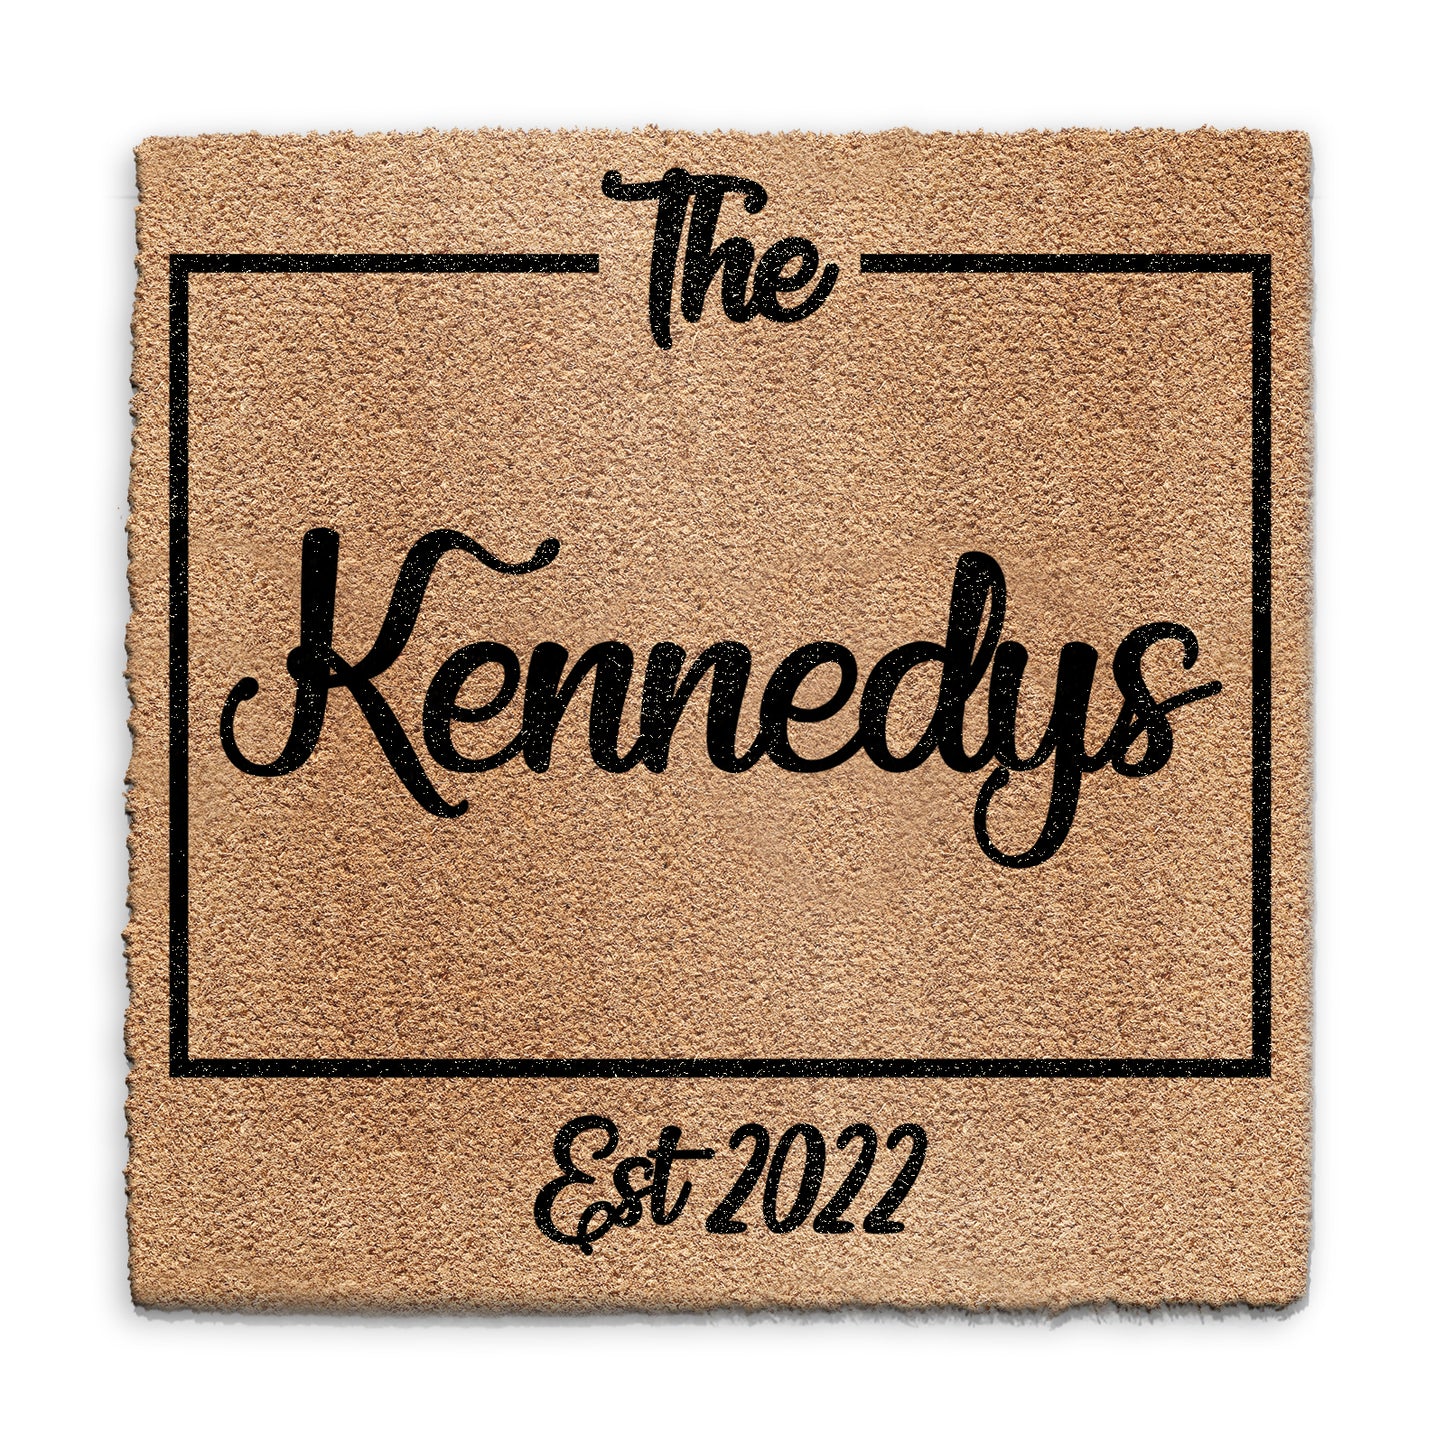 Personalised Doormat with Established Date and Family Name